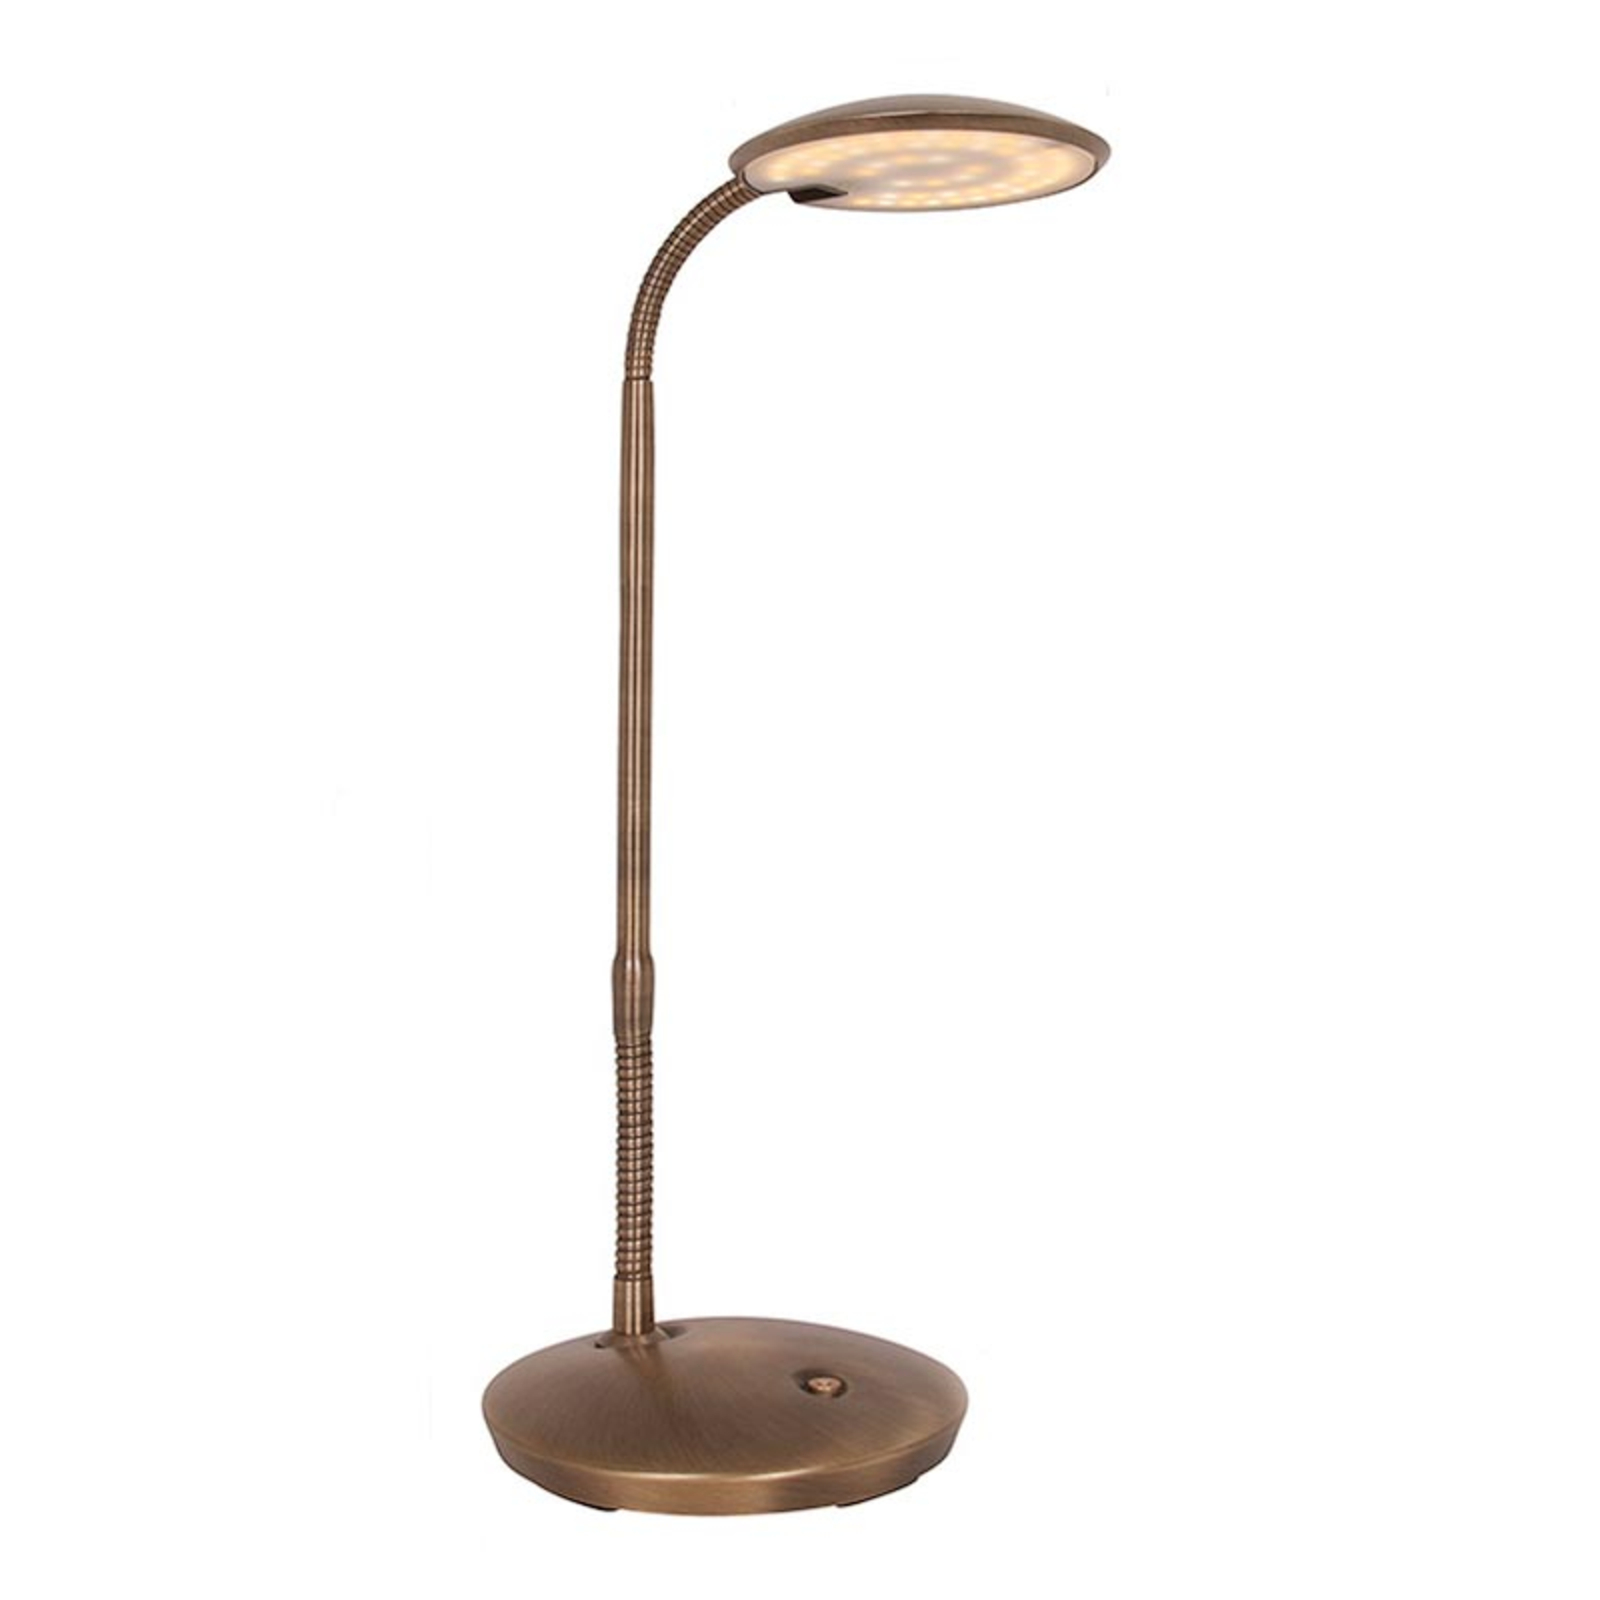 With dimmer - LED table lamp Zenith bronze